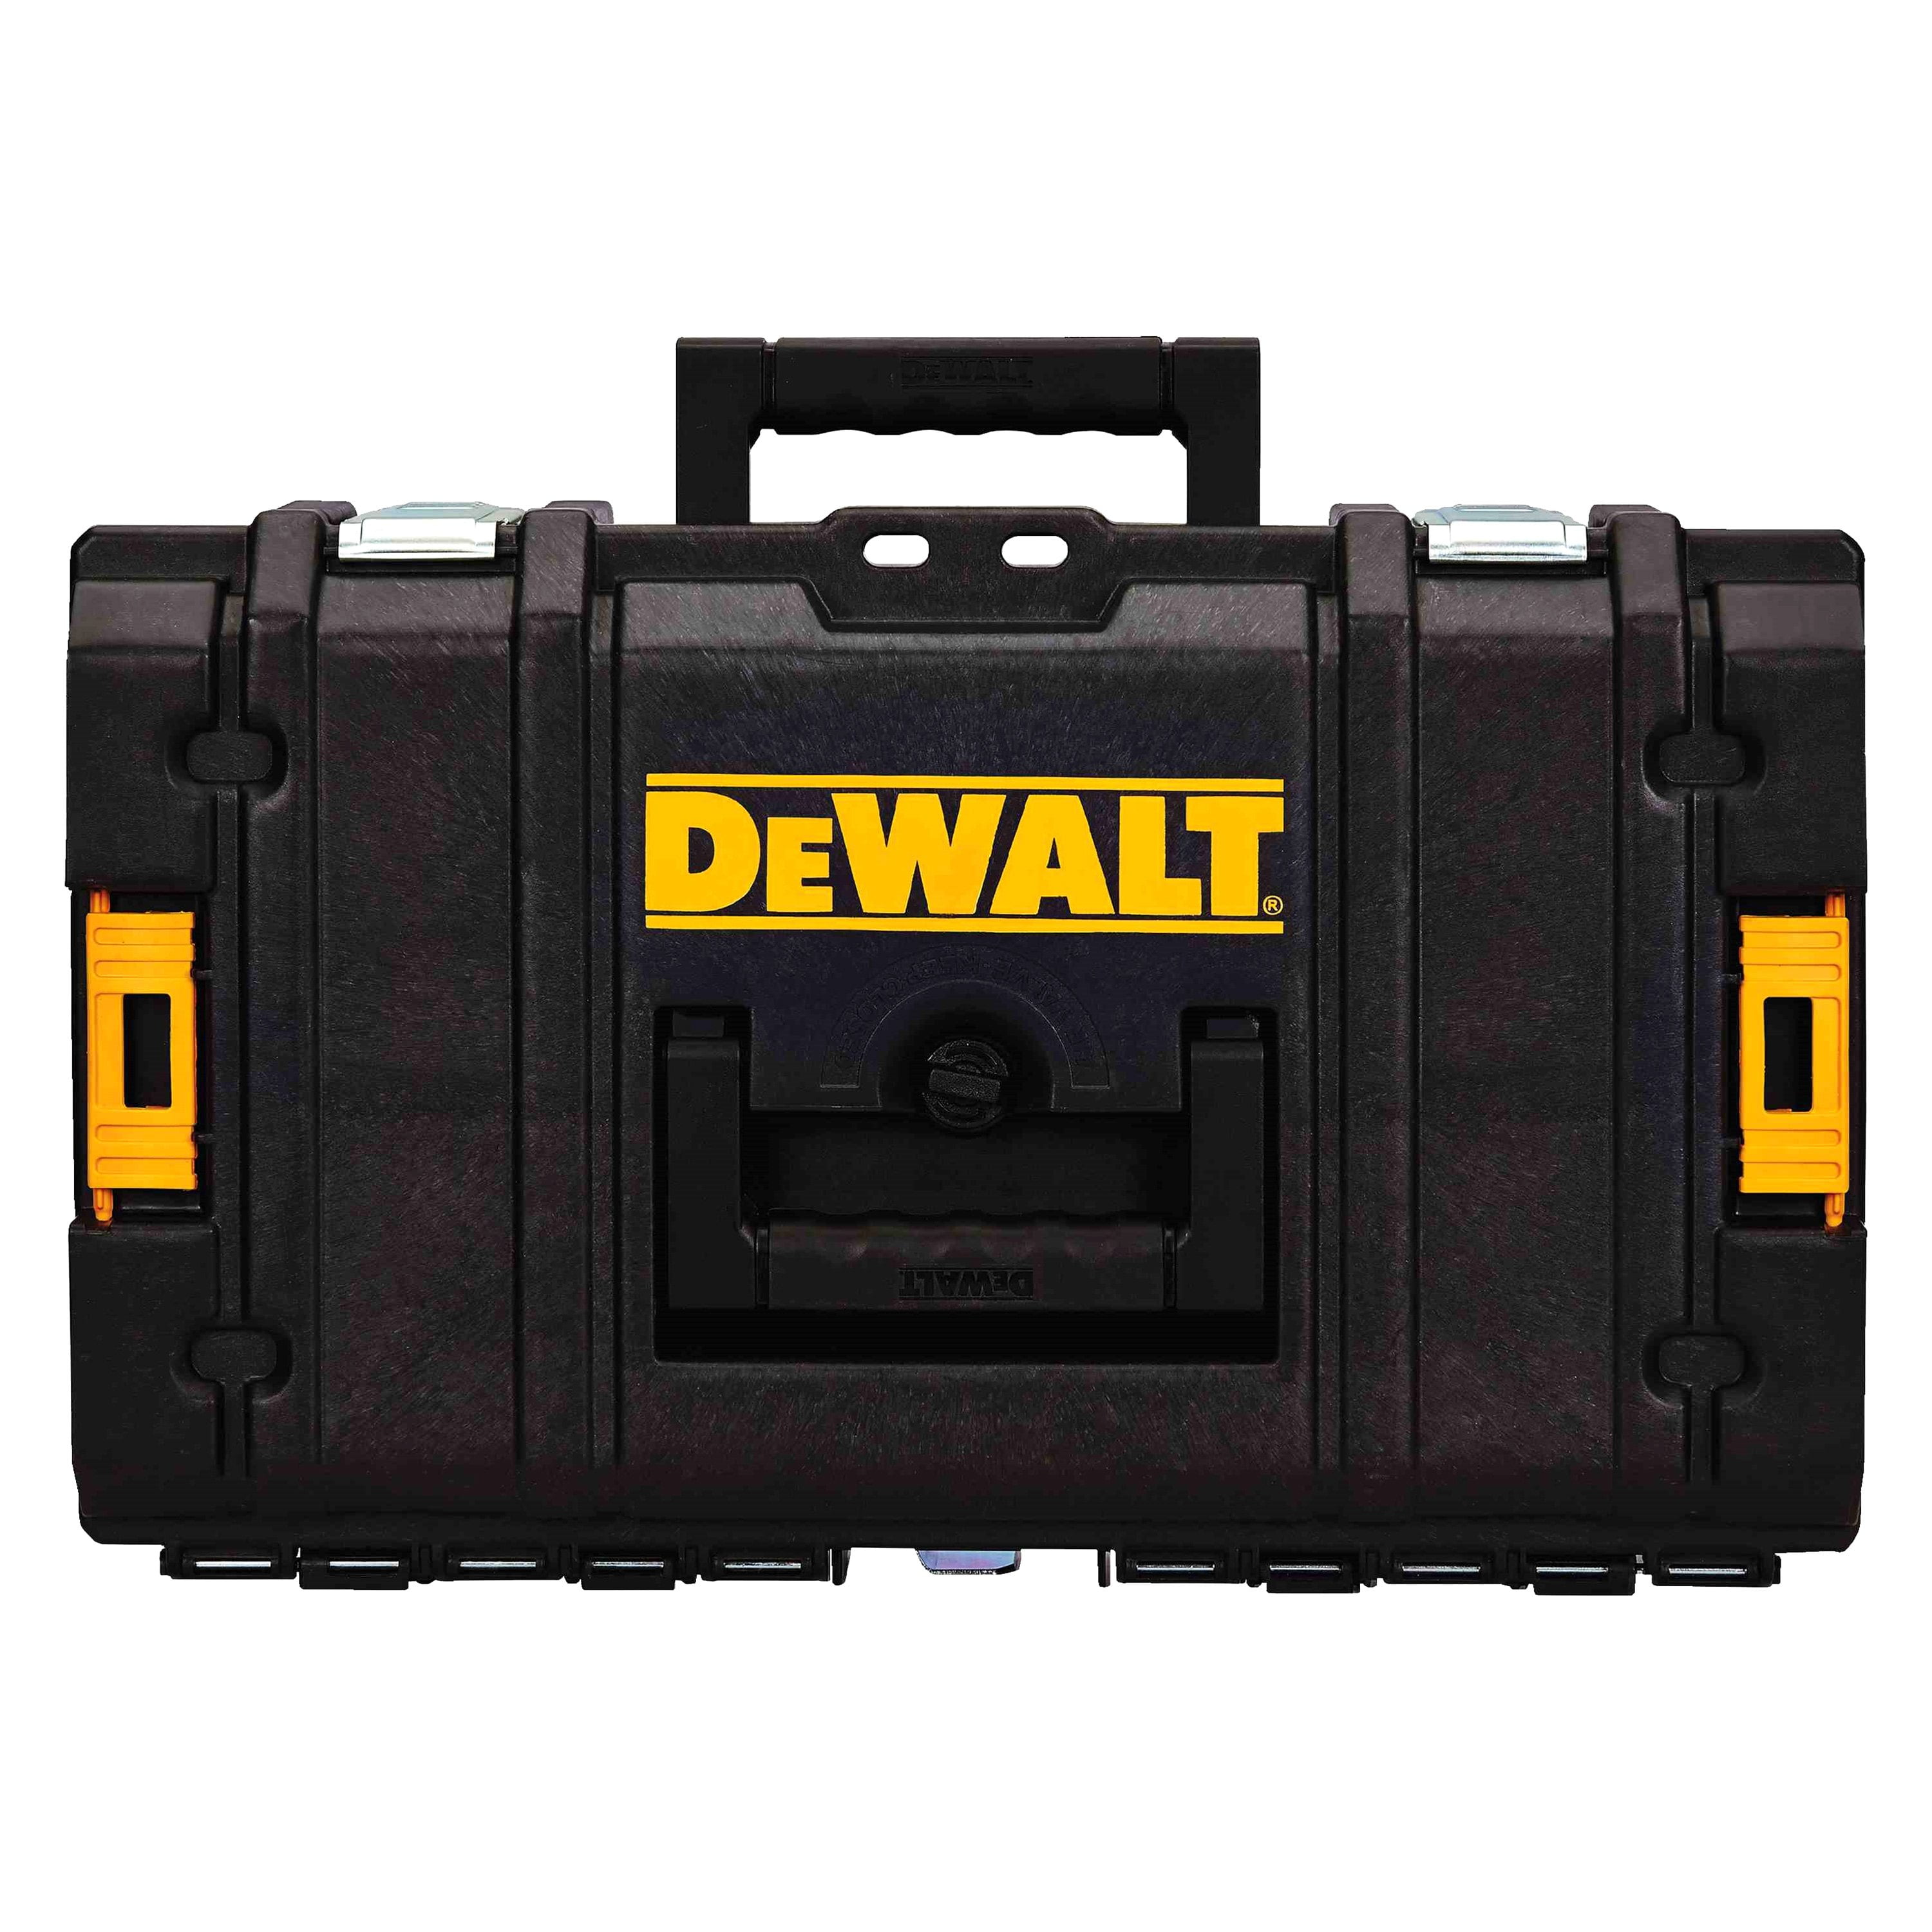 DeWALT DWST08201 - Toughsystem DS150 Plastic Tool Box with Small Parts